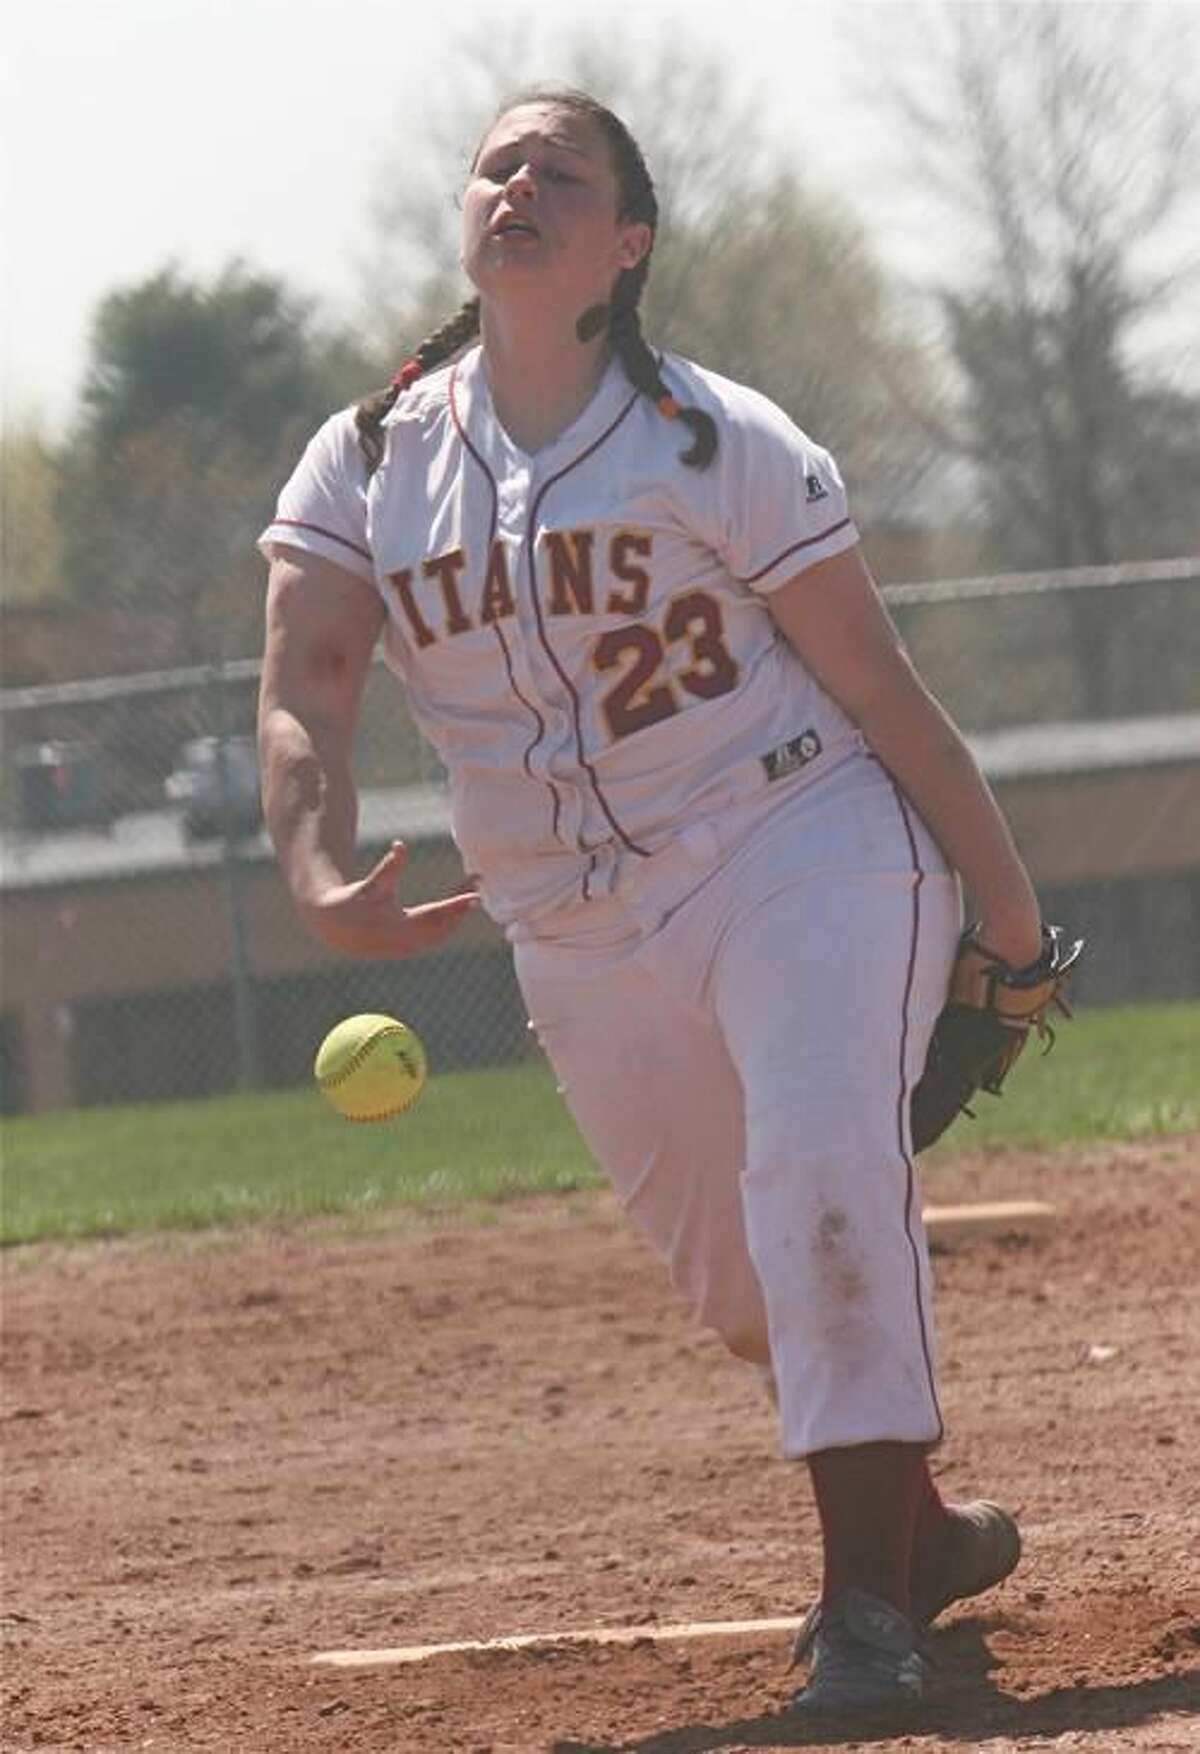 Sheehan’s Dani Thuerling delivers a pitch in a game played last season. The Titans opened the 2010 campaign with a 4-3 loss to Guilford but bounced back to post its first win over Mercy-Middletown in years. It was also new coach Jocelyn Chang’s first victory. (File photo by Russ McCreven)